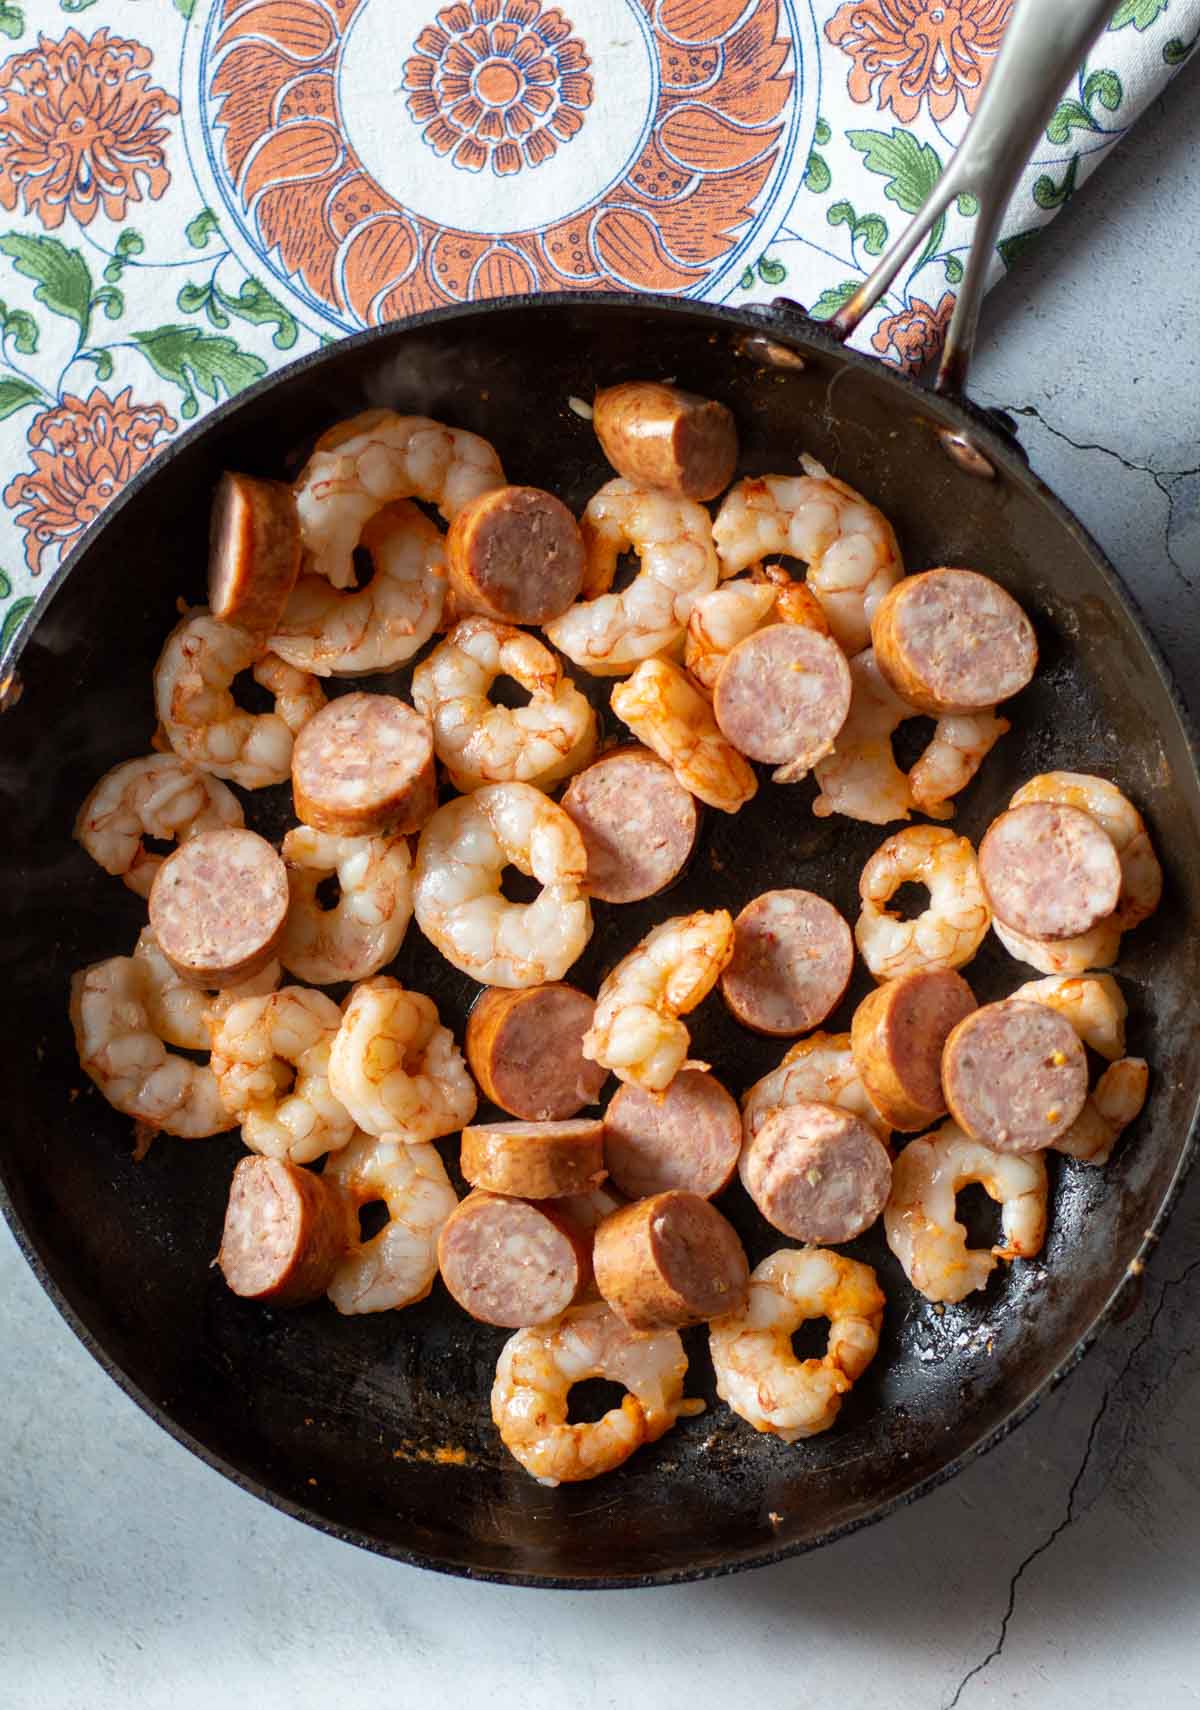 Cooking shrimp and sausage to make spicy paella.